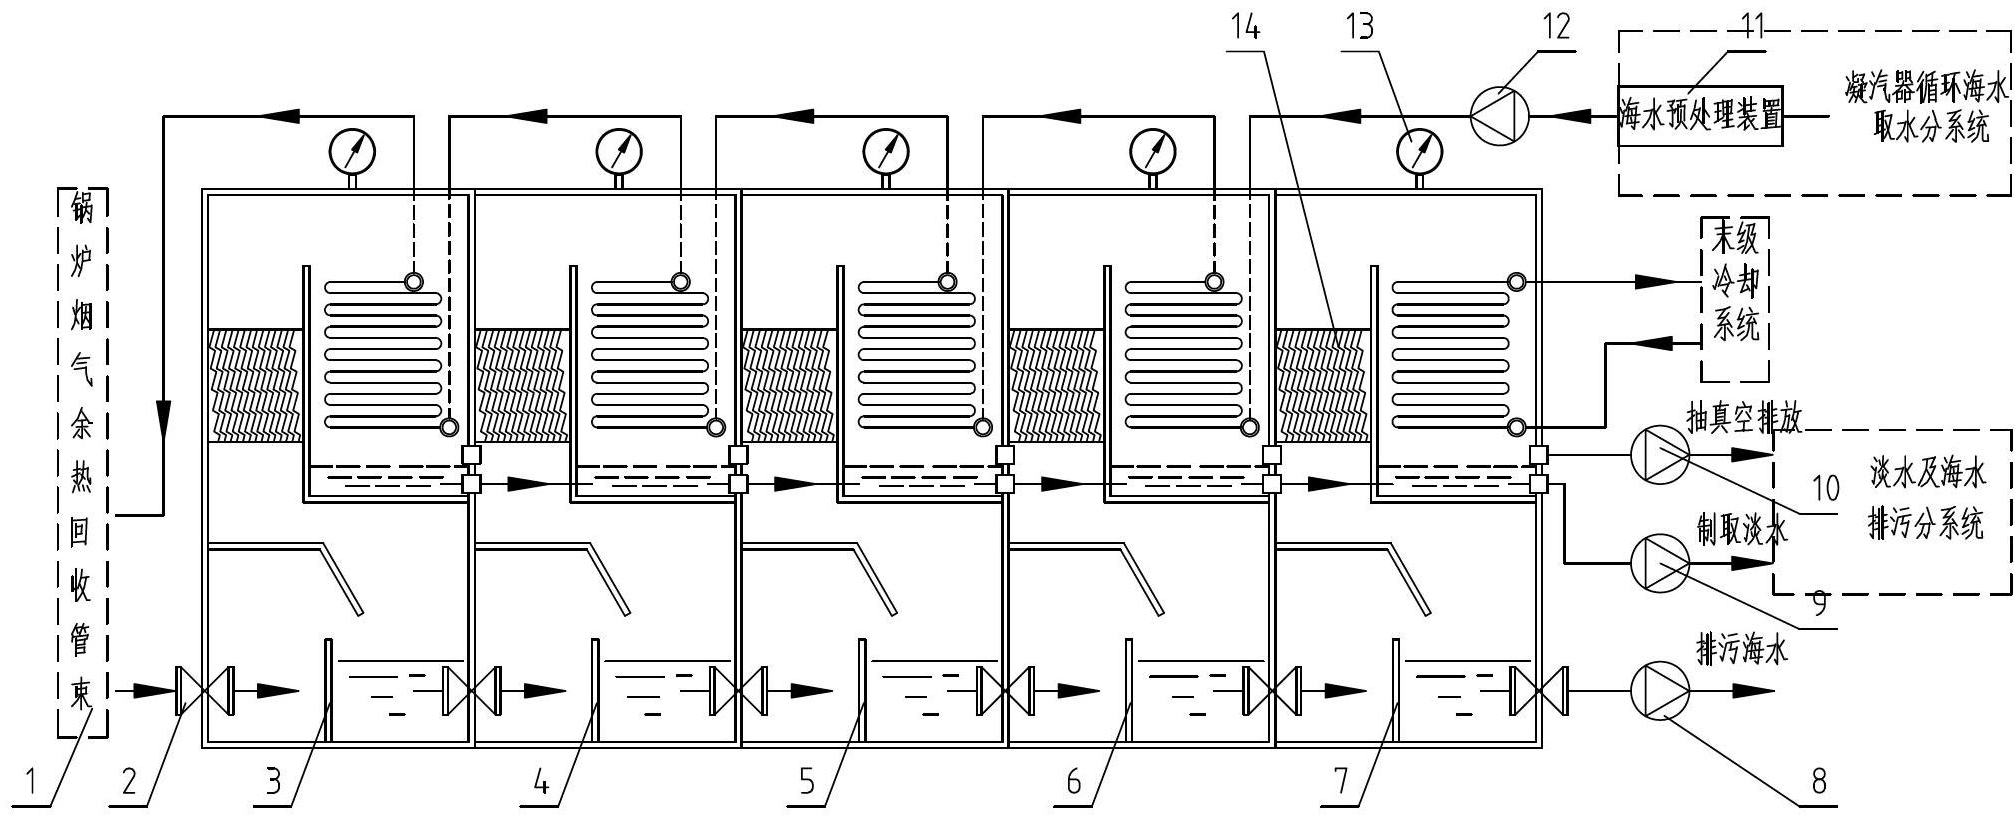 System for desalinating seawater by waste heat from power plant